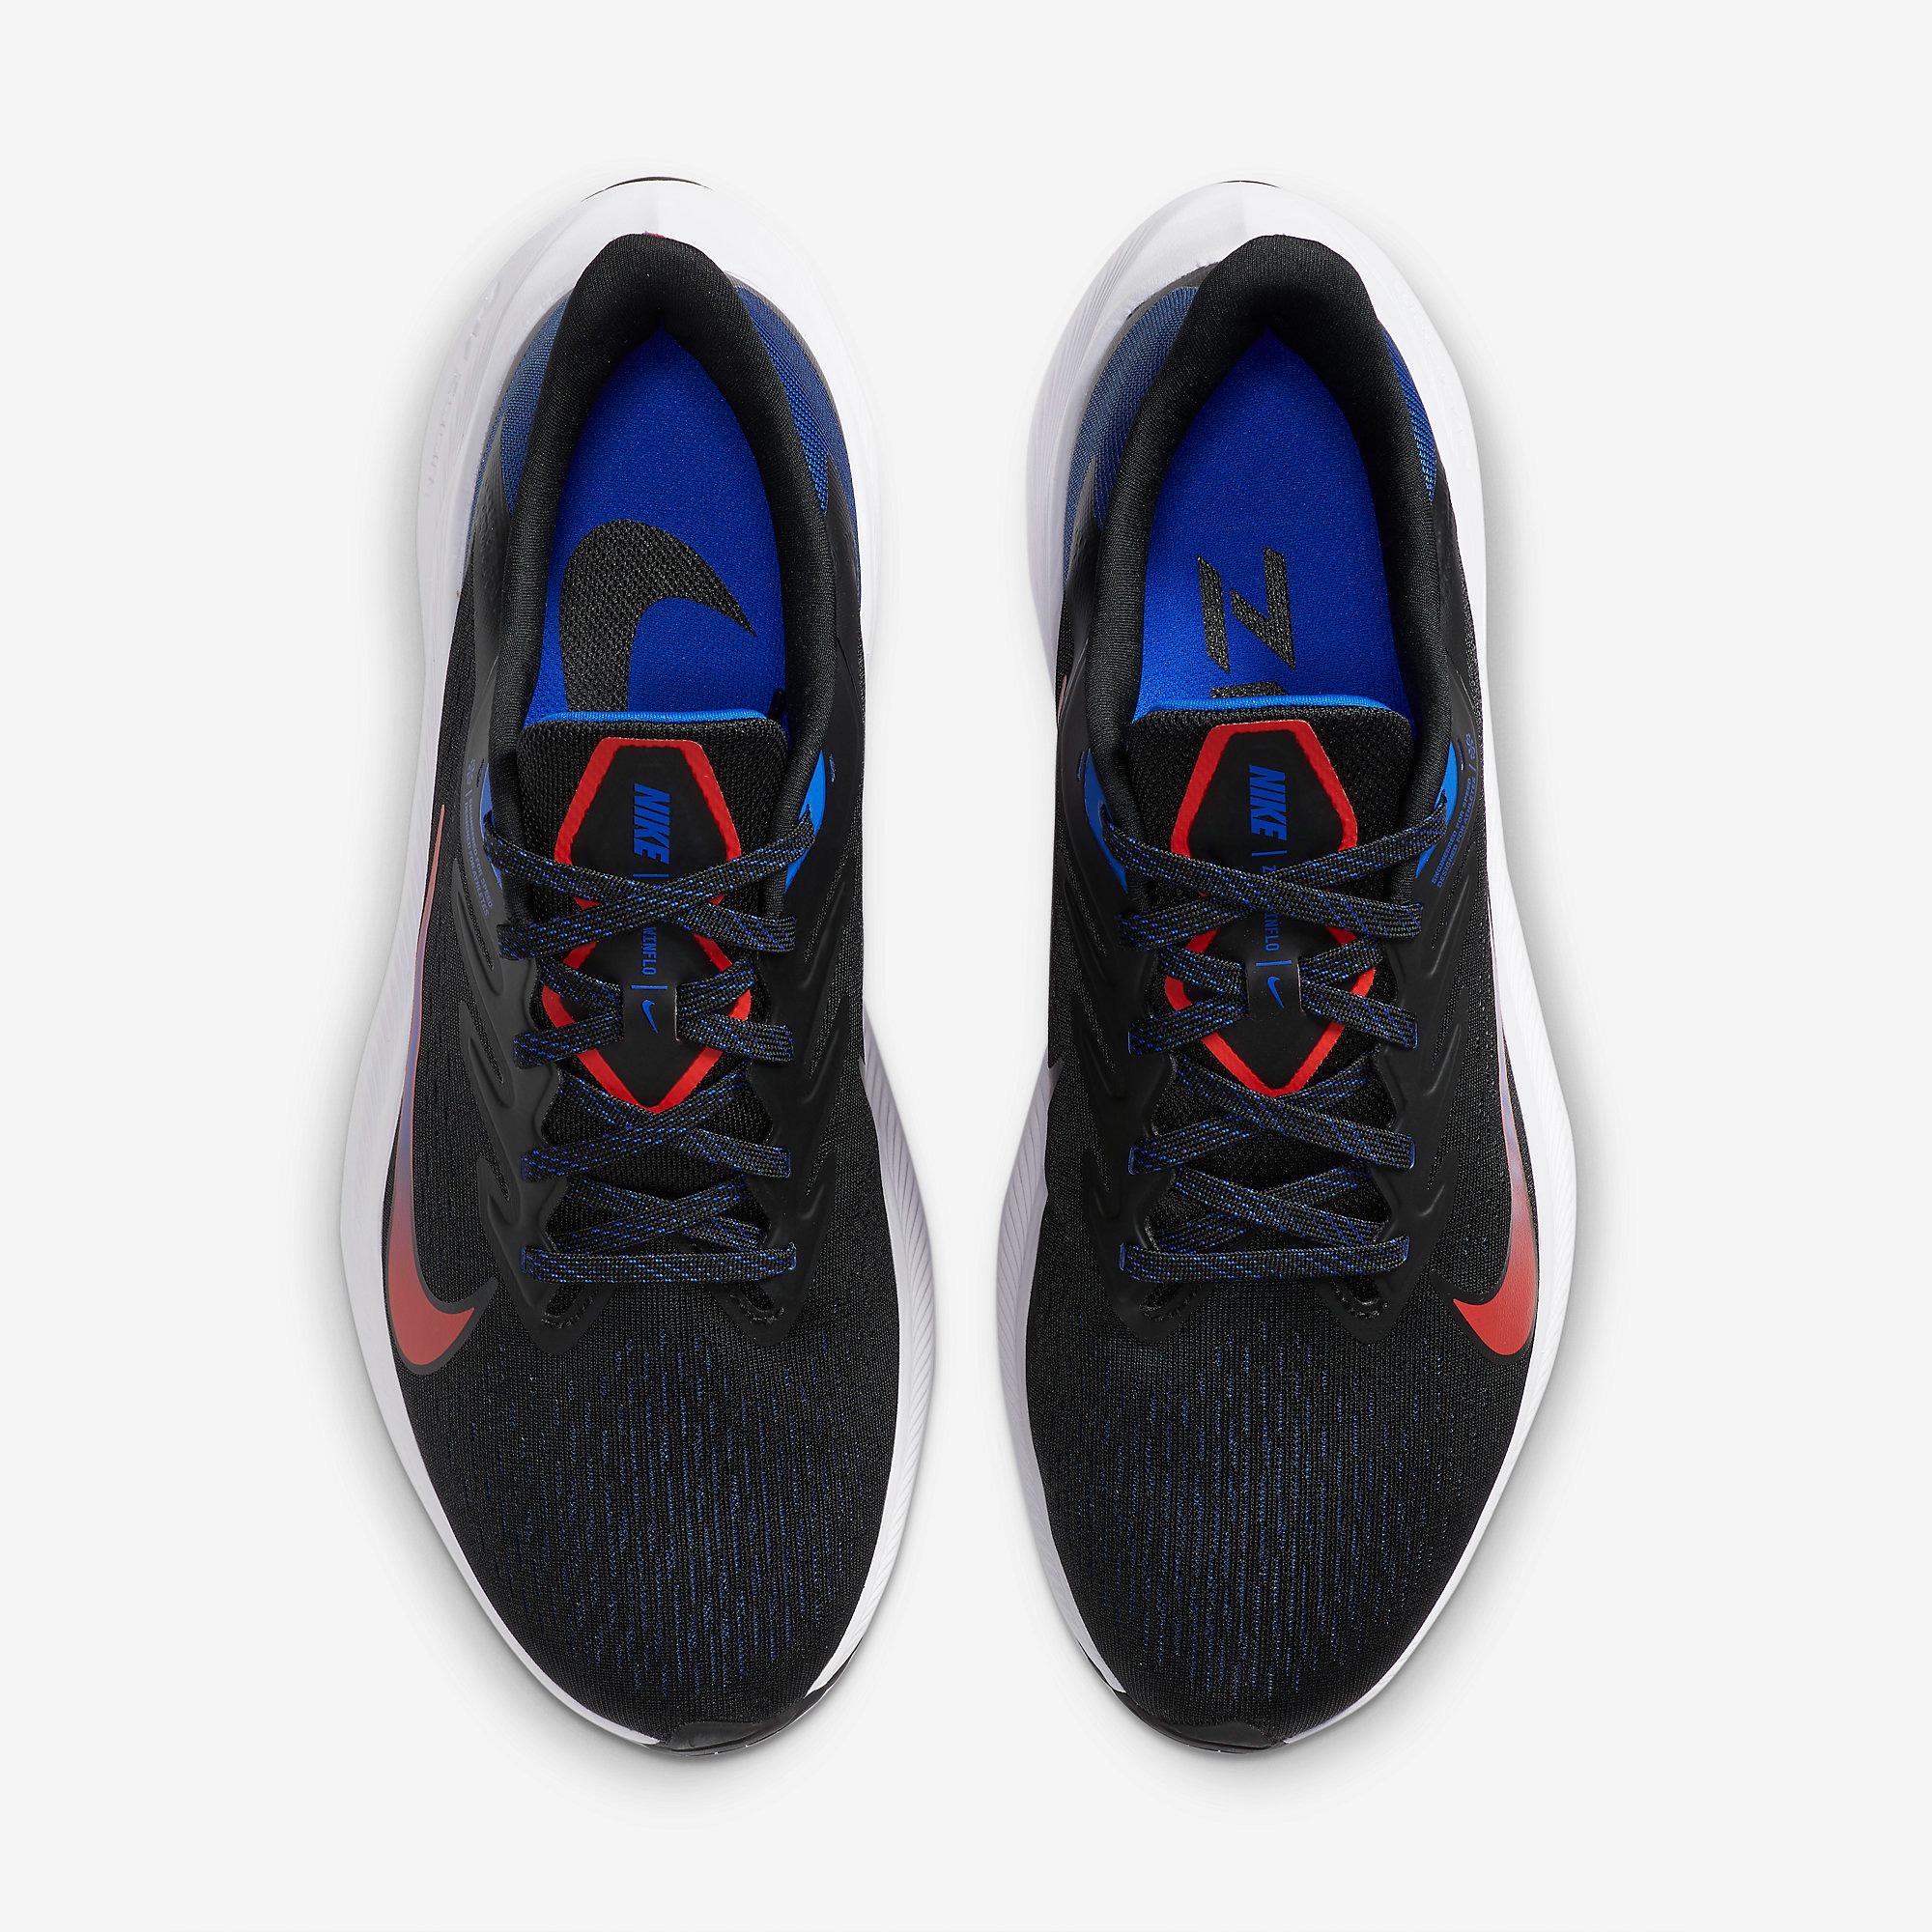 Nike Mens Air Zoom Winflow 7 Running Shoes - Black/Red/Blue ...